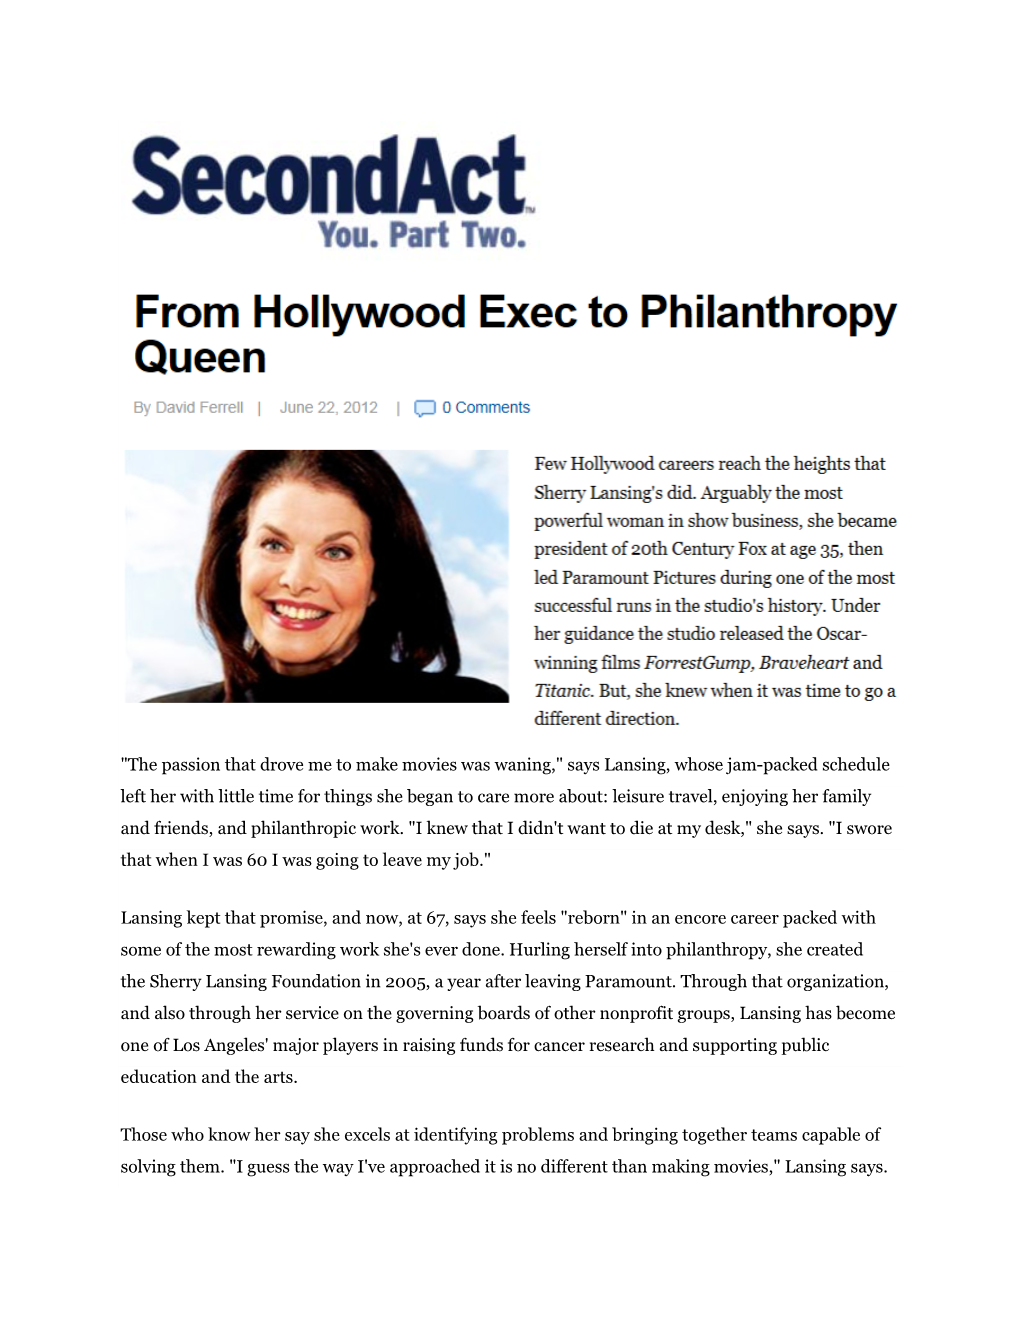 From Hollywood Exec to Philanthropy Queen